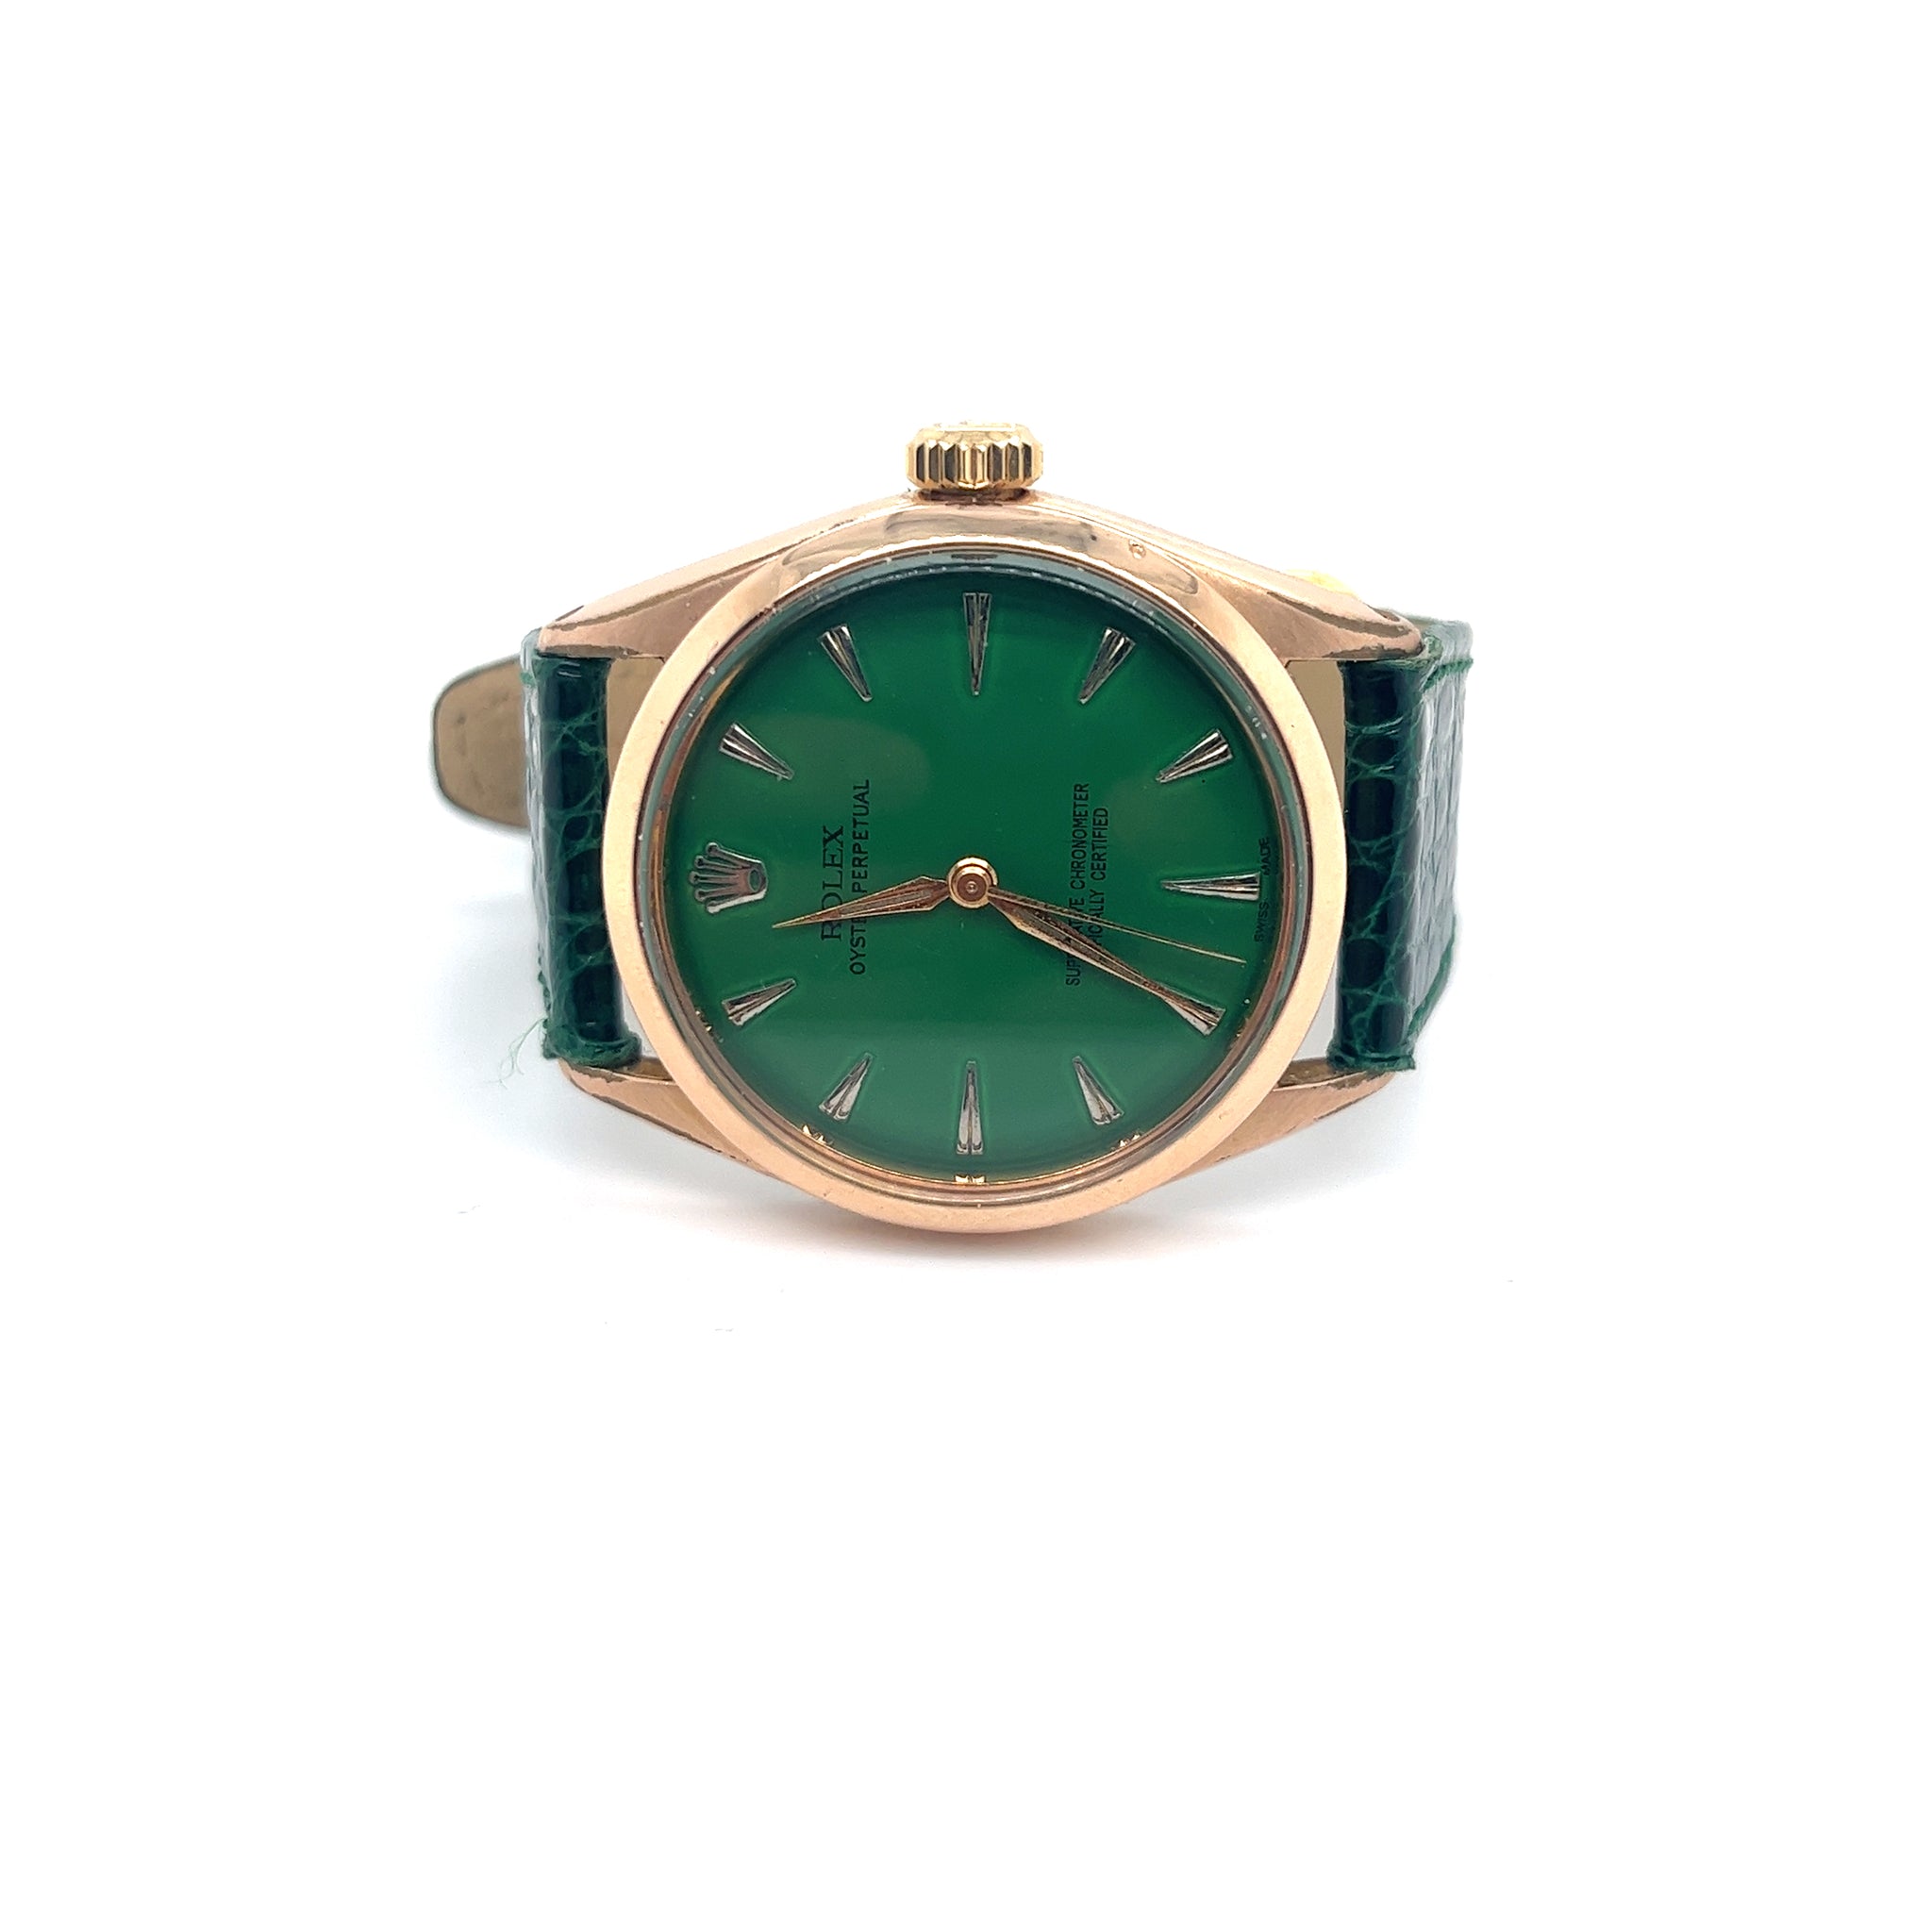 Rolex Oyster Perpetual Green Dial